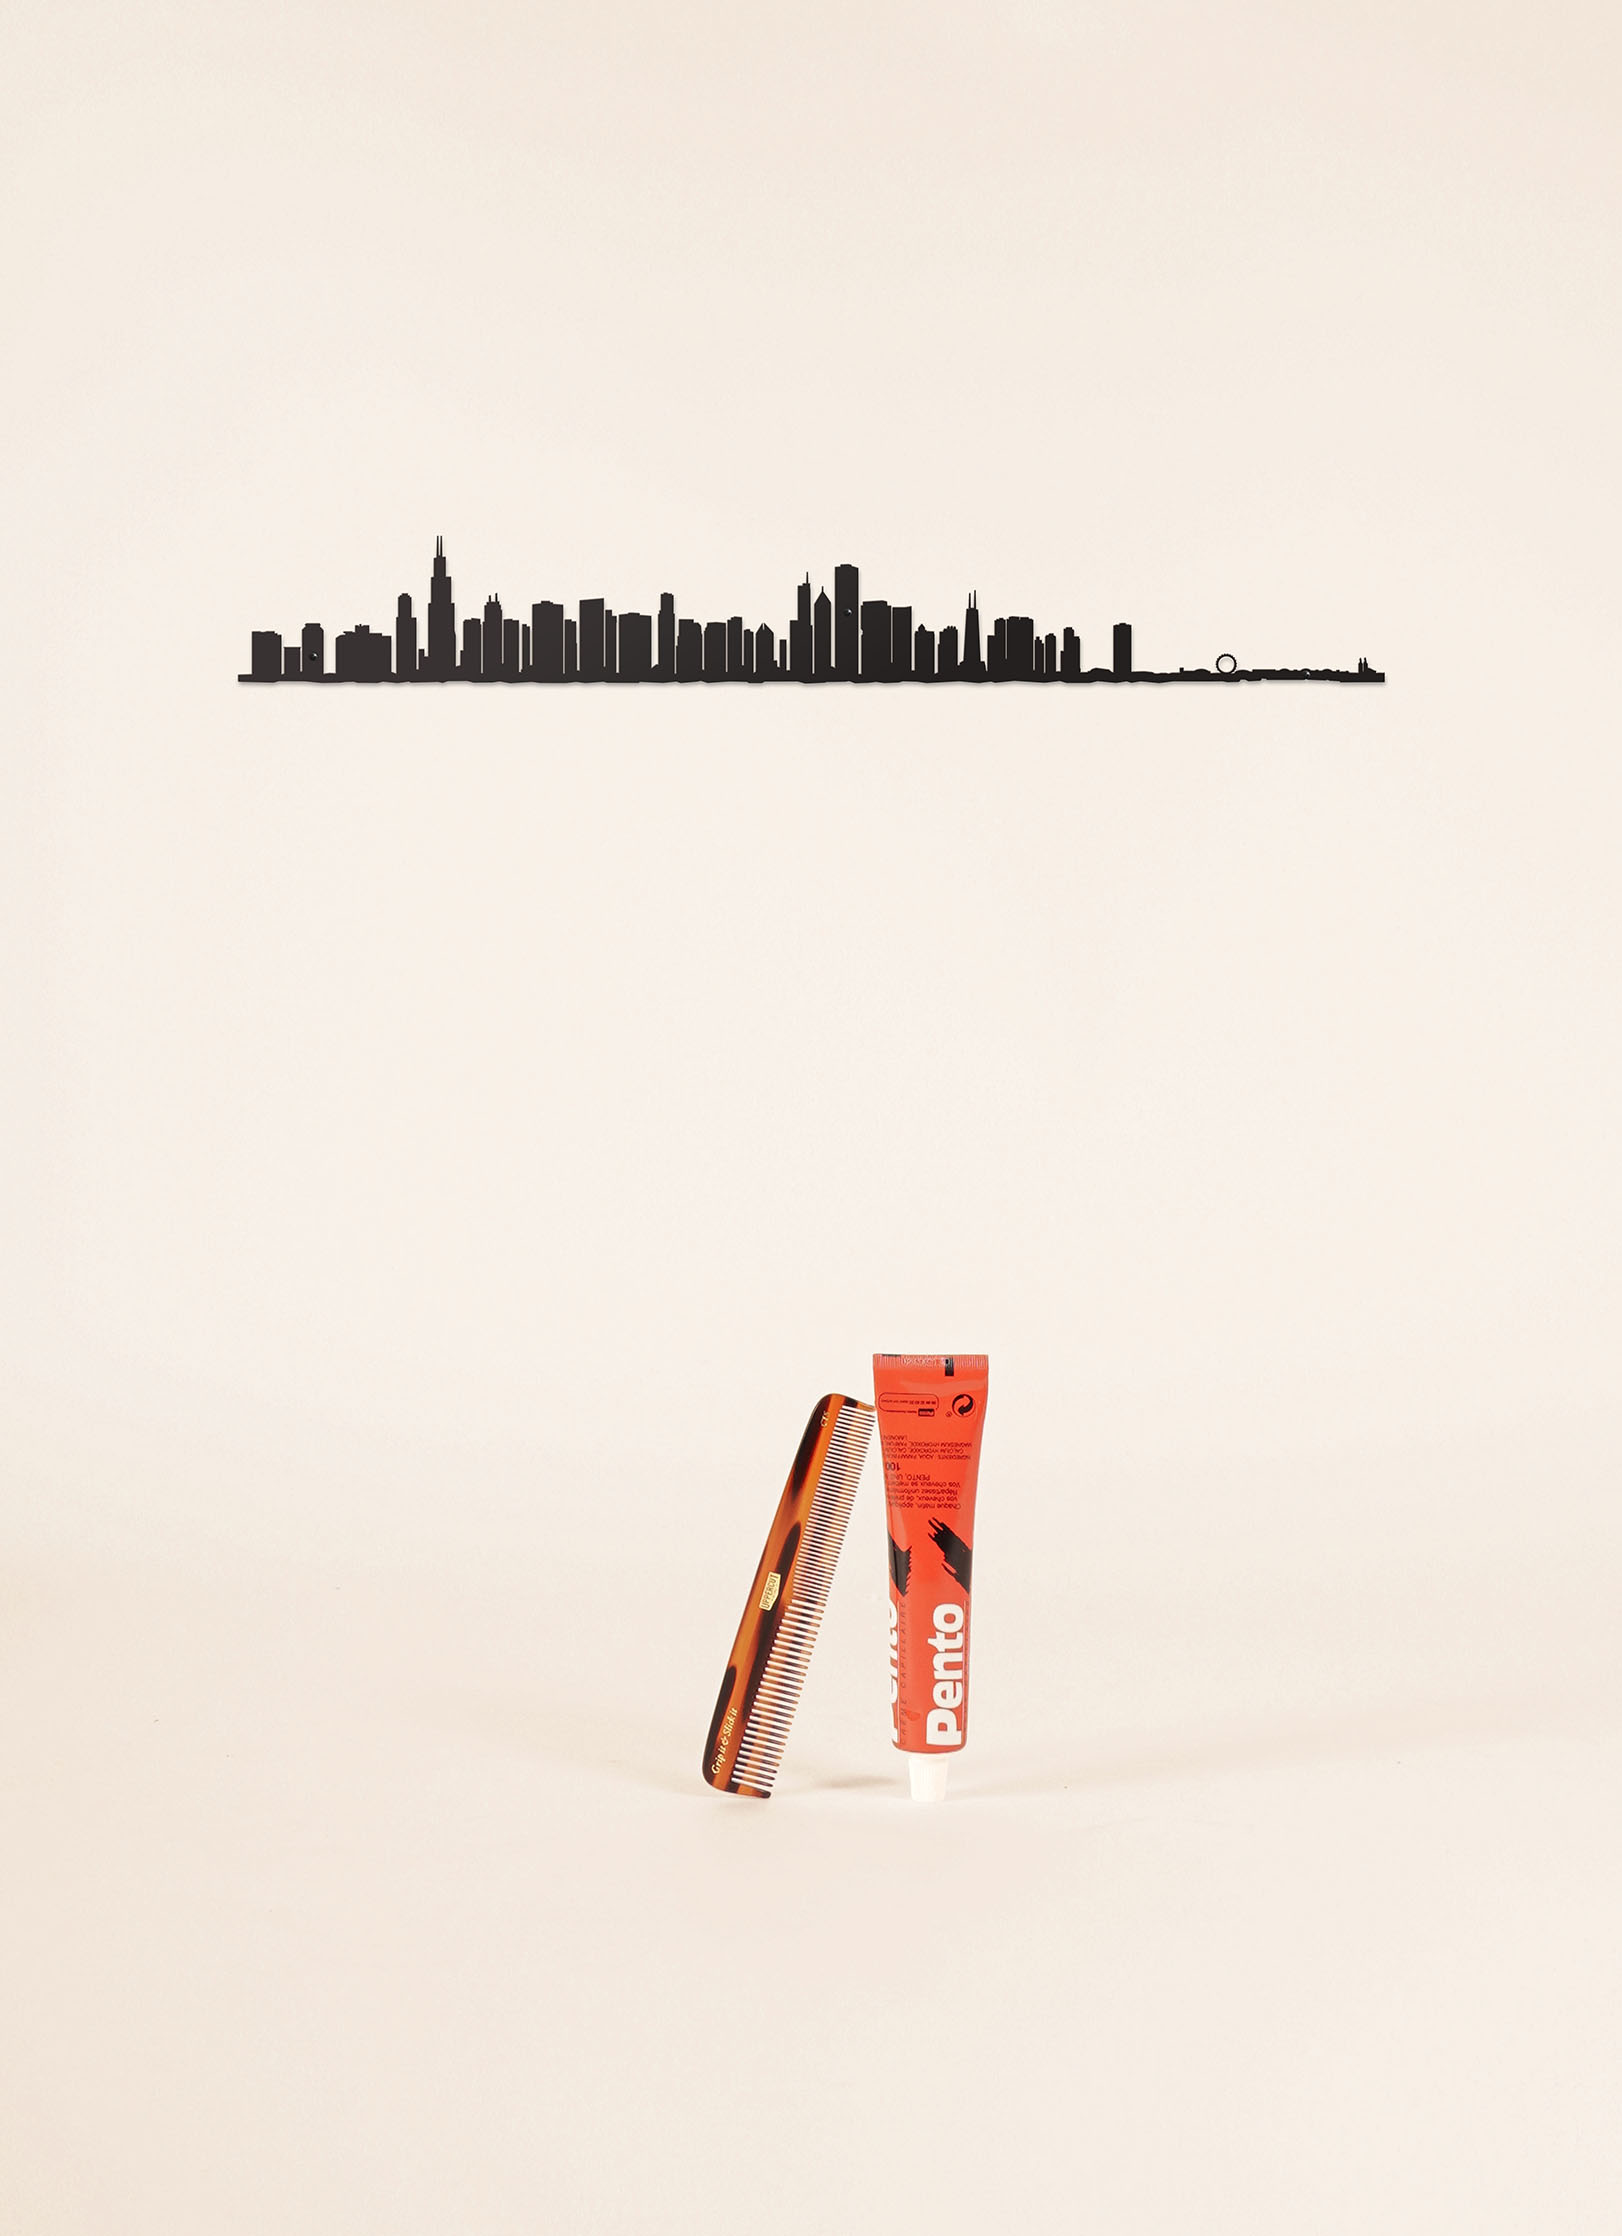 Skyline of Chicago, Steel wall decoration